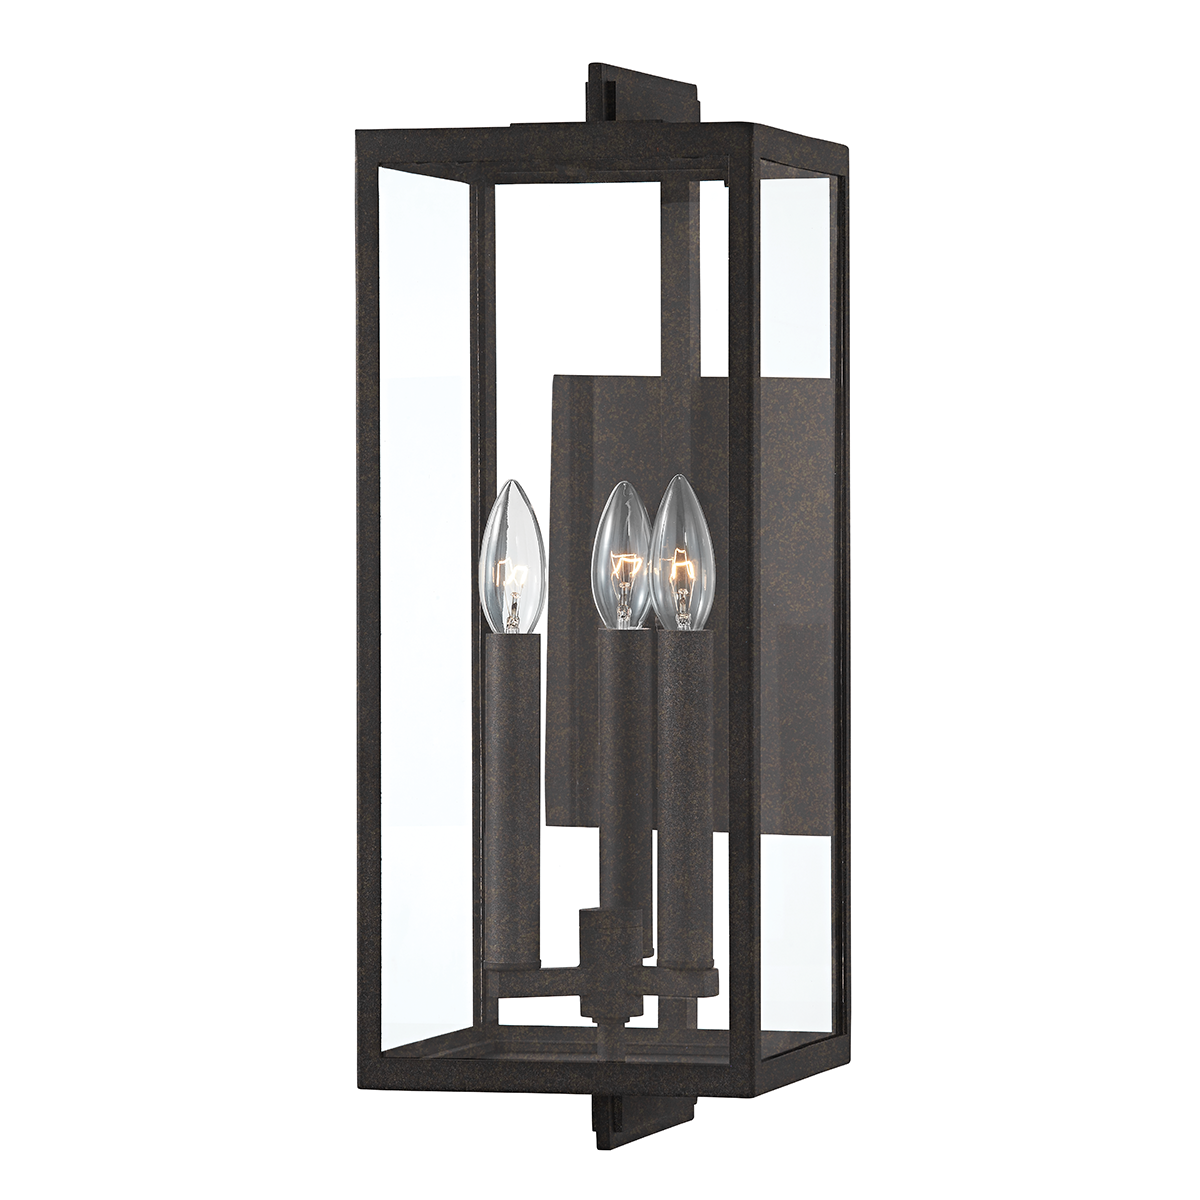 Troy NICO 3 LIGHT EXTERIOR WALL SCONCE B5513 Outdoor l Wall Troy Lighting   